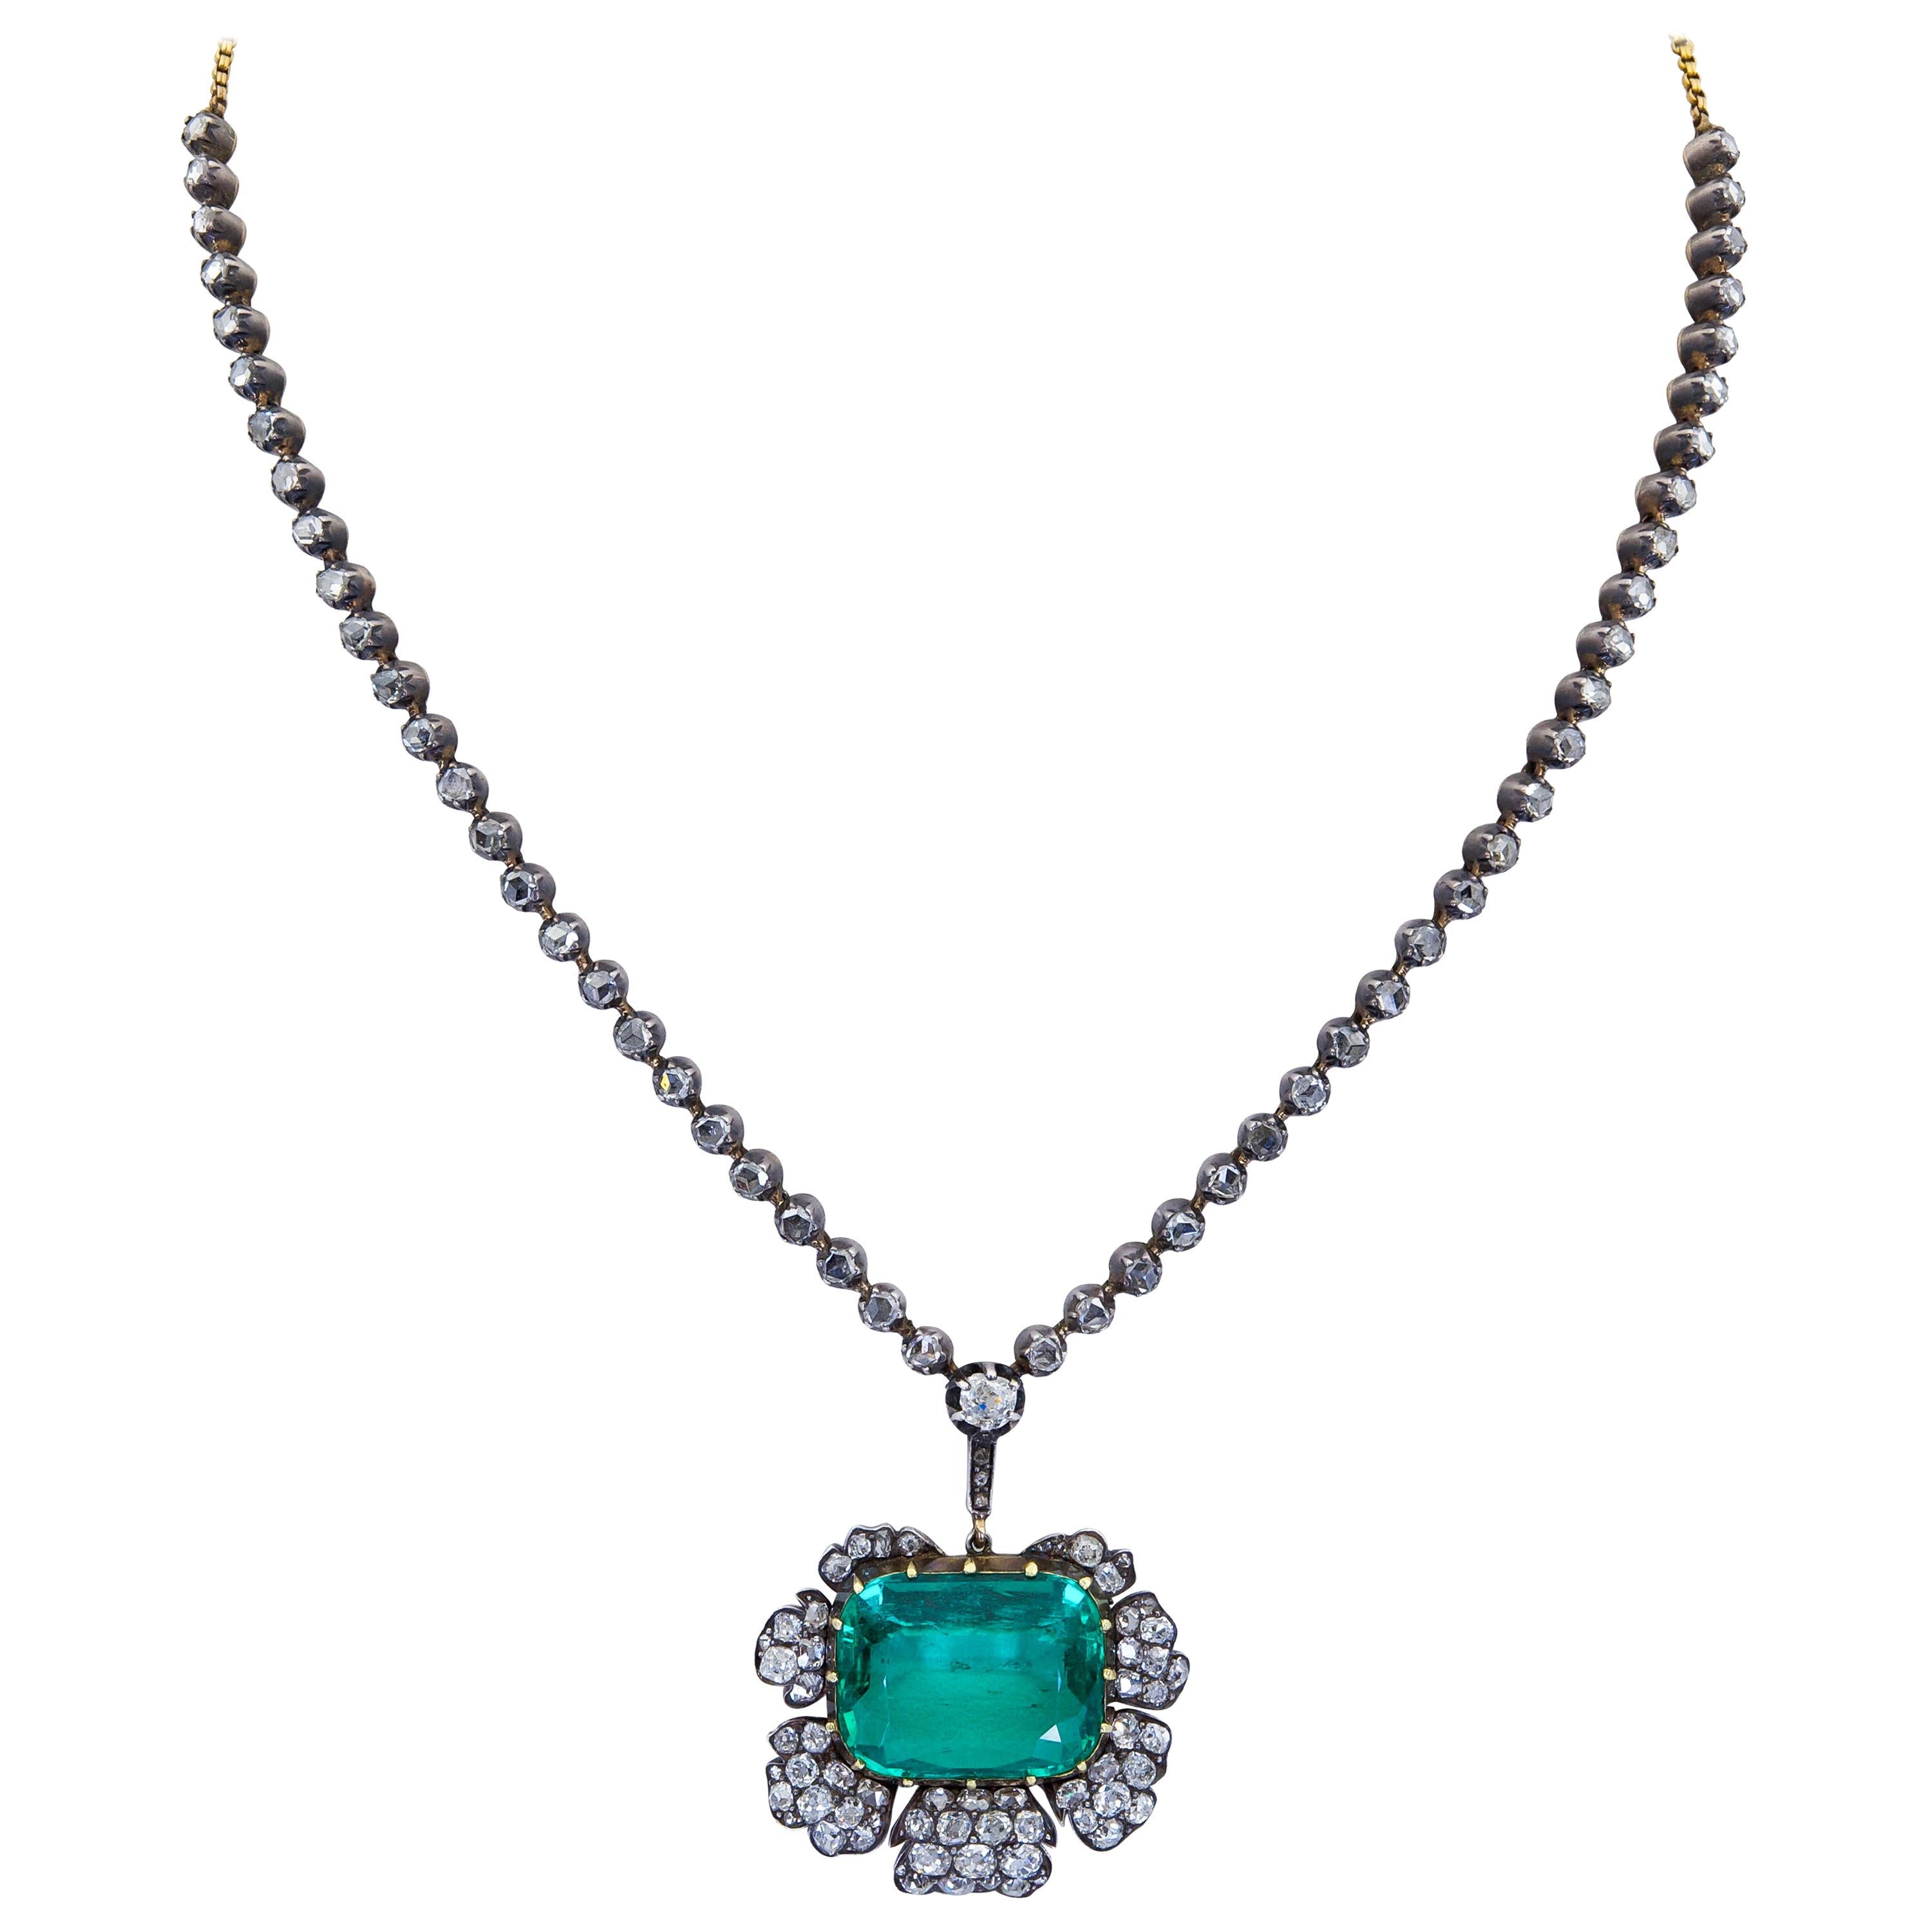 1980s 11.53 Carat Green Emerald and Diamond Floral Motif Necklace